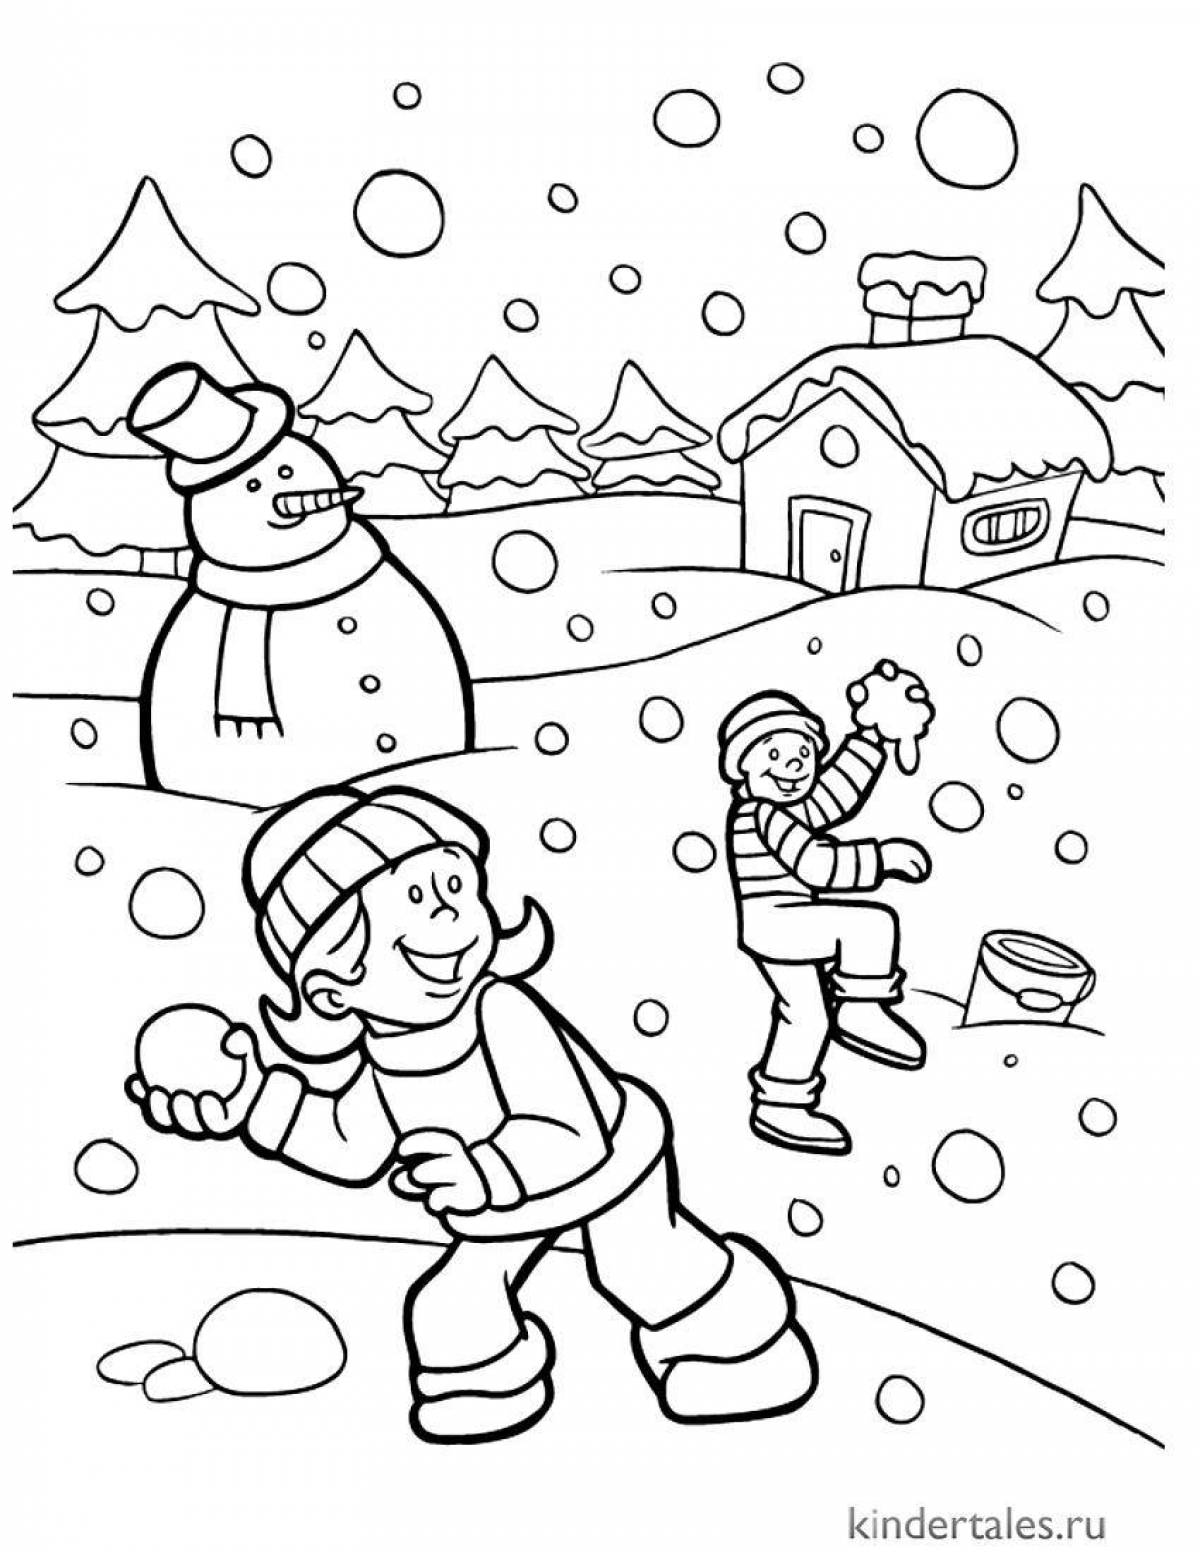 Live winter coloring for boys